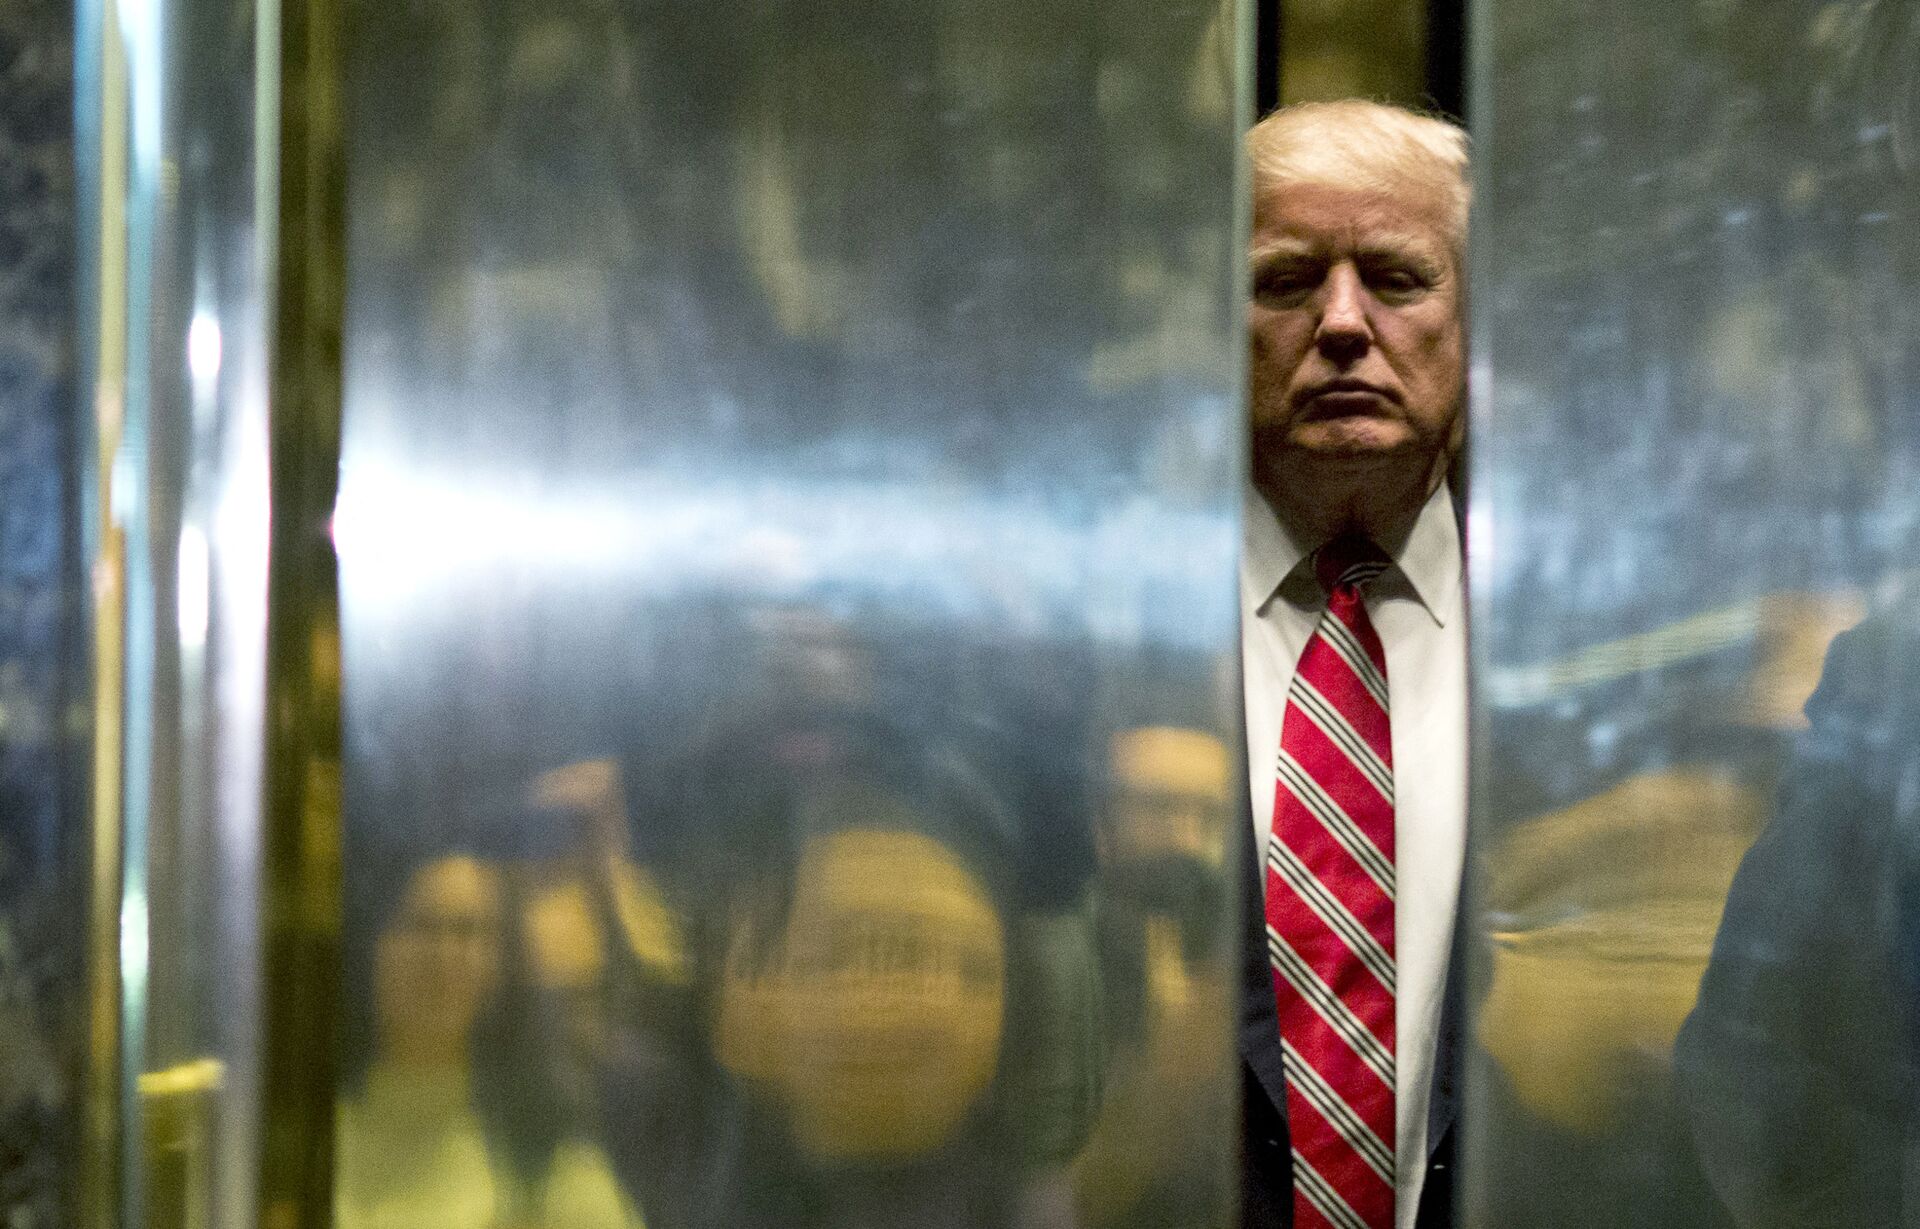 In this file photo taken on January 16, 2017 US President-elect Donald Trump boards the elevator after escorting Martin Luther King III to the lobby after meetings at Trump Tower in New York City. - The Trump Organization is being investigated in a criminal capacity as New York prosecutors advance their probe into former president Donald Trump's business dealings, the state attorney general announced Tuesday. We have informed the Trump Organization that our investigation into the organization is no longer purely civil in nature, a spokesman for Attorney General Letitia James' office said. We are now actively investigating the Trump Organization in a criminal capacity, along with the Manhattan DA. - Sputnik International, 1920, 07.09.2021